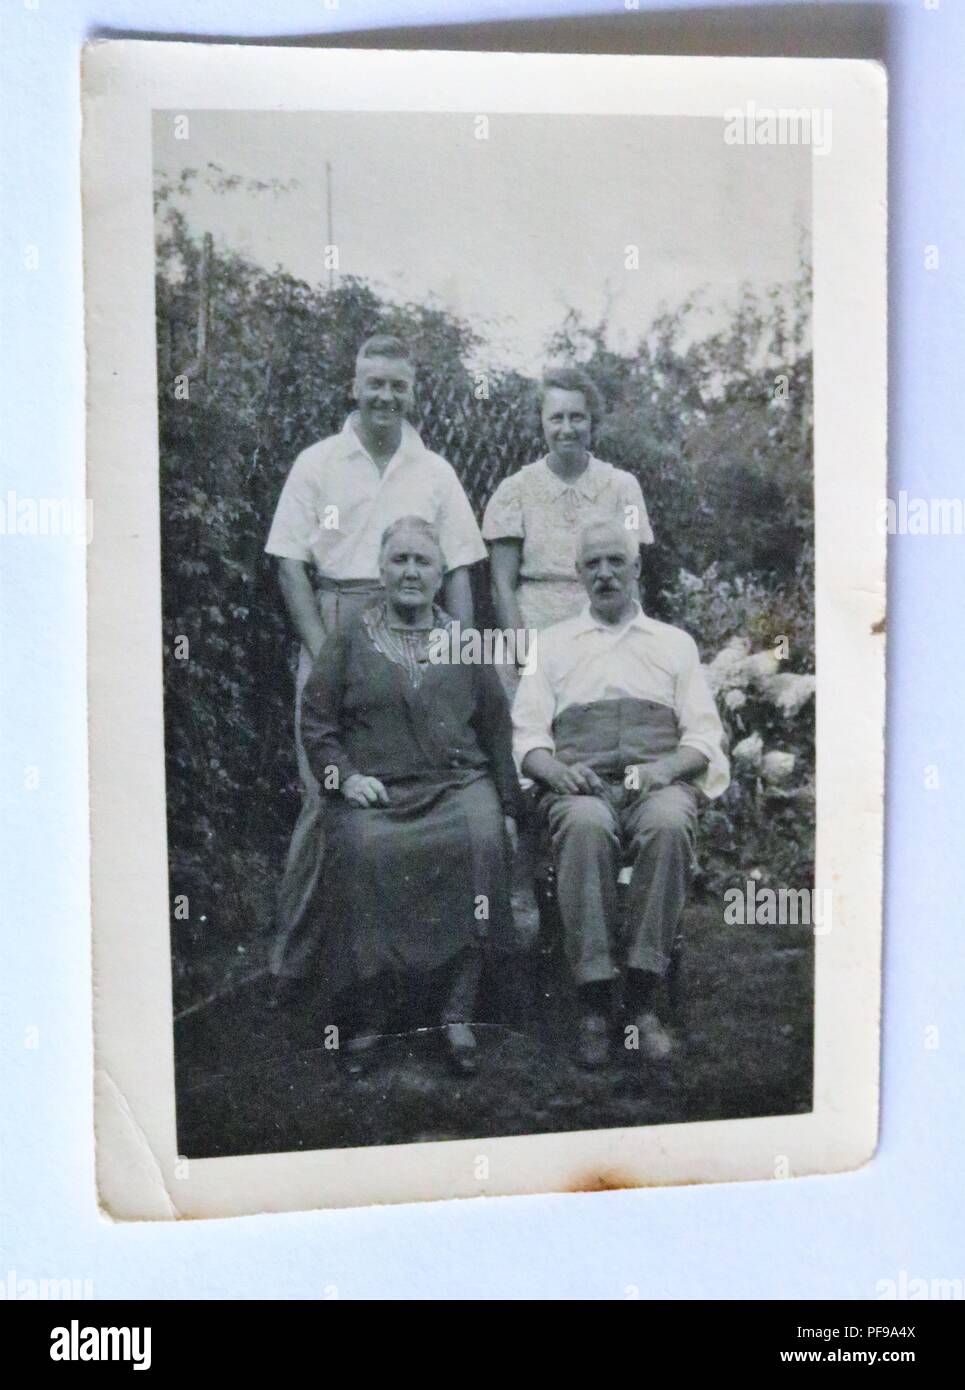 Social History - Black and white old photograph showing four middle aged people in a garden Stock Photo